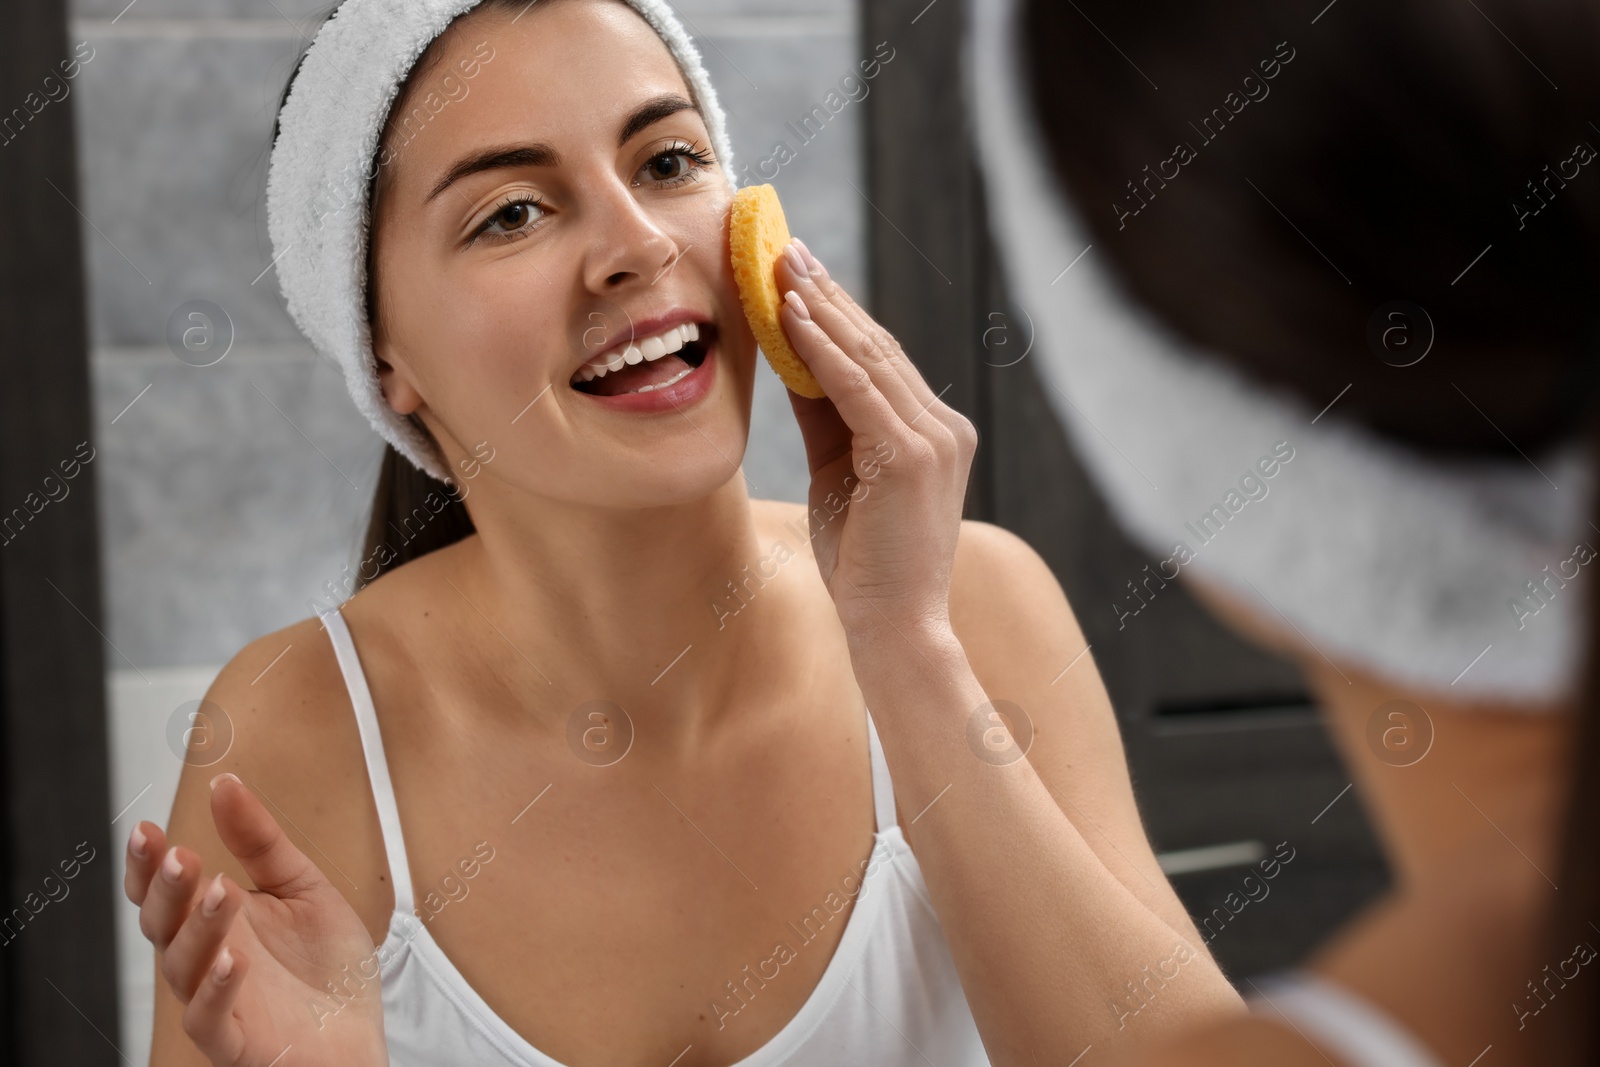 Photo of Young woman with headband washing her face using sponge near mirror in bathroom